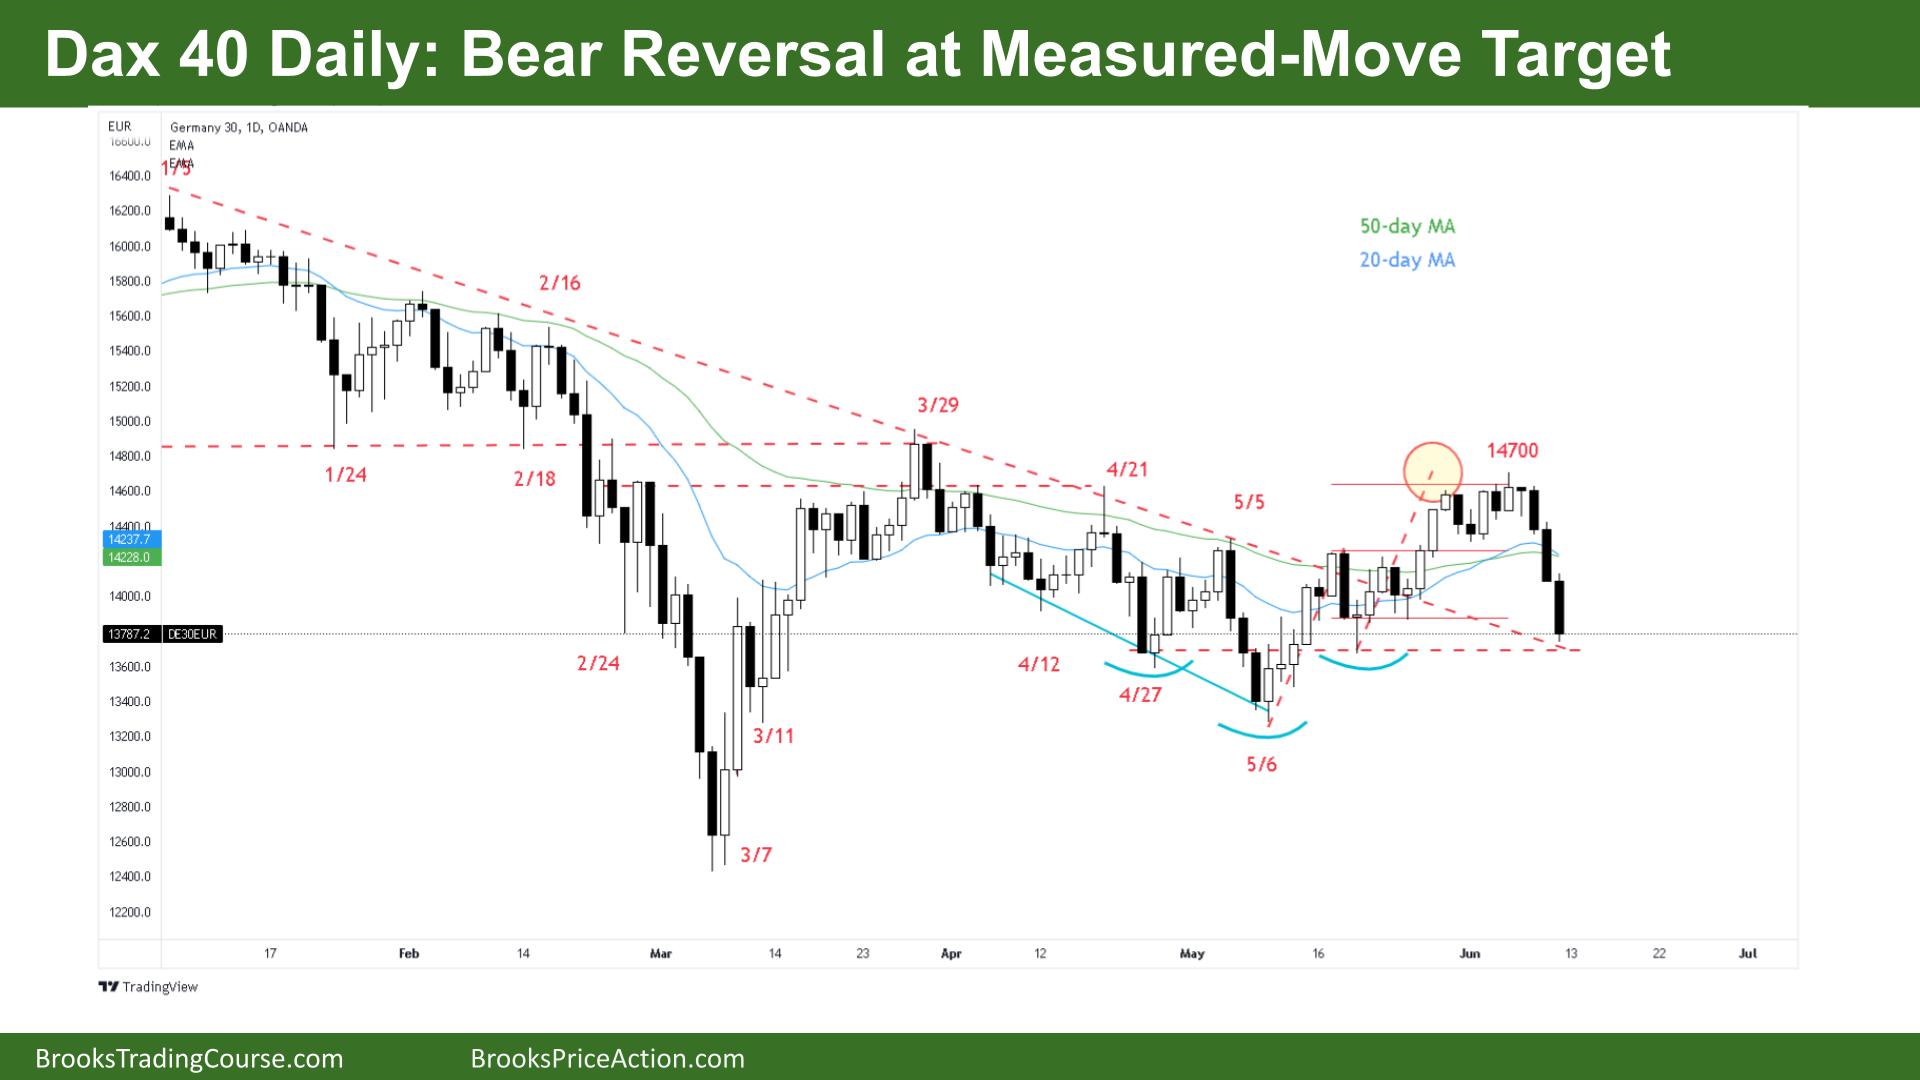 Dax 40 Bear Reversal at Measured Move Target on Daily Chart